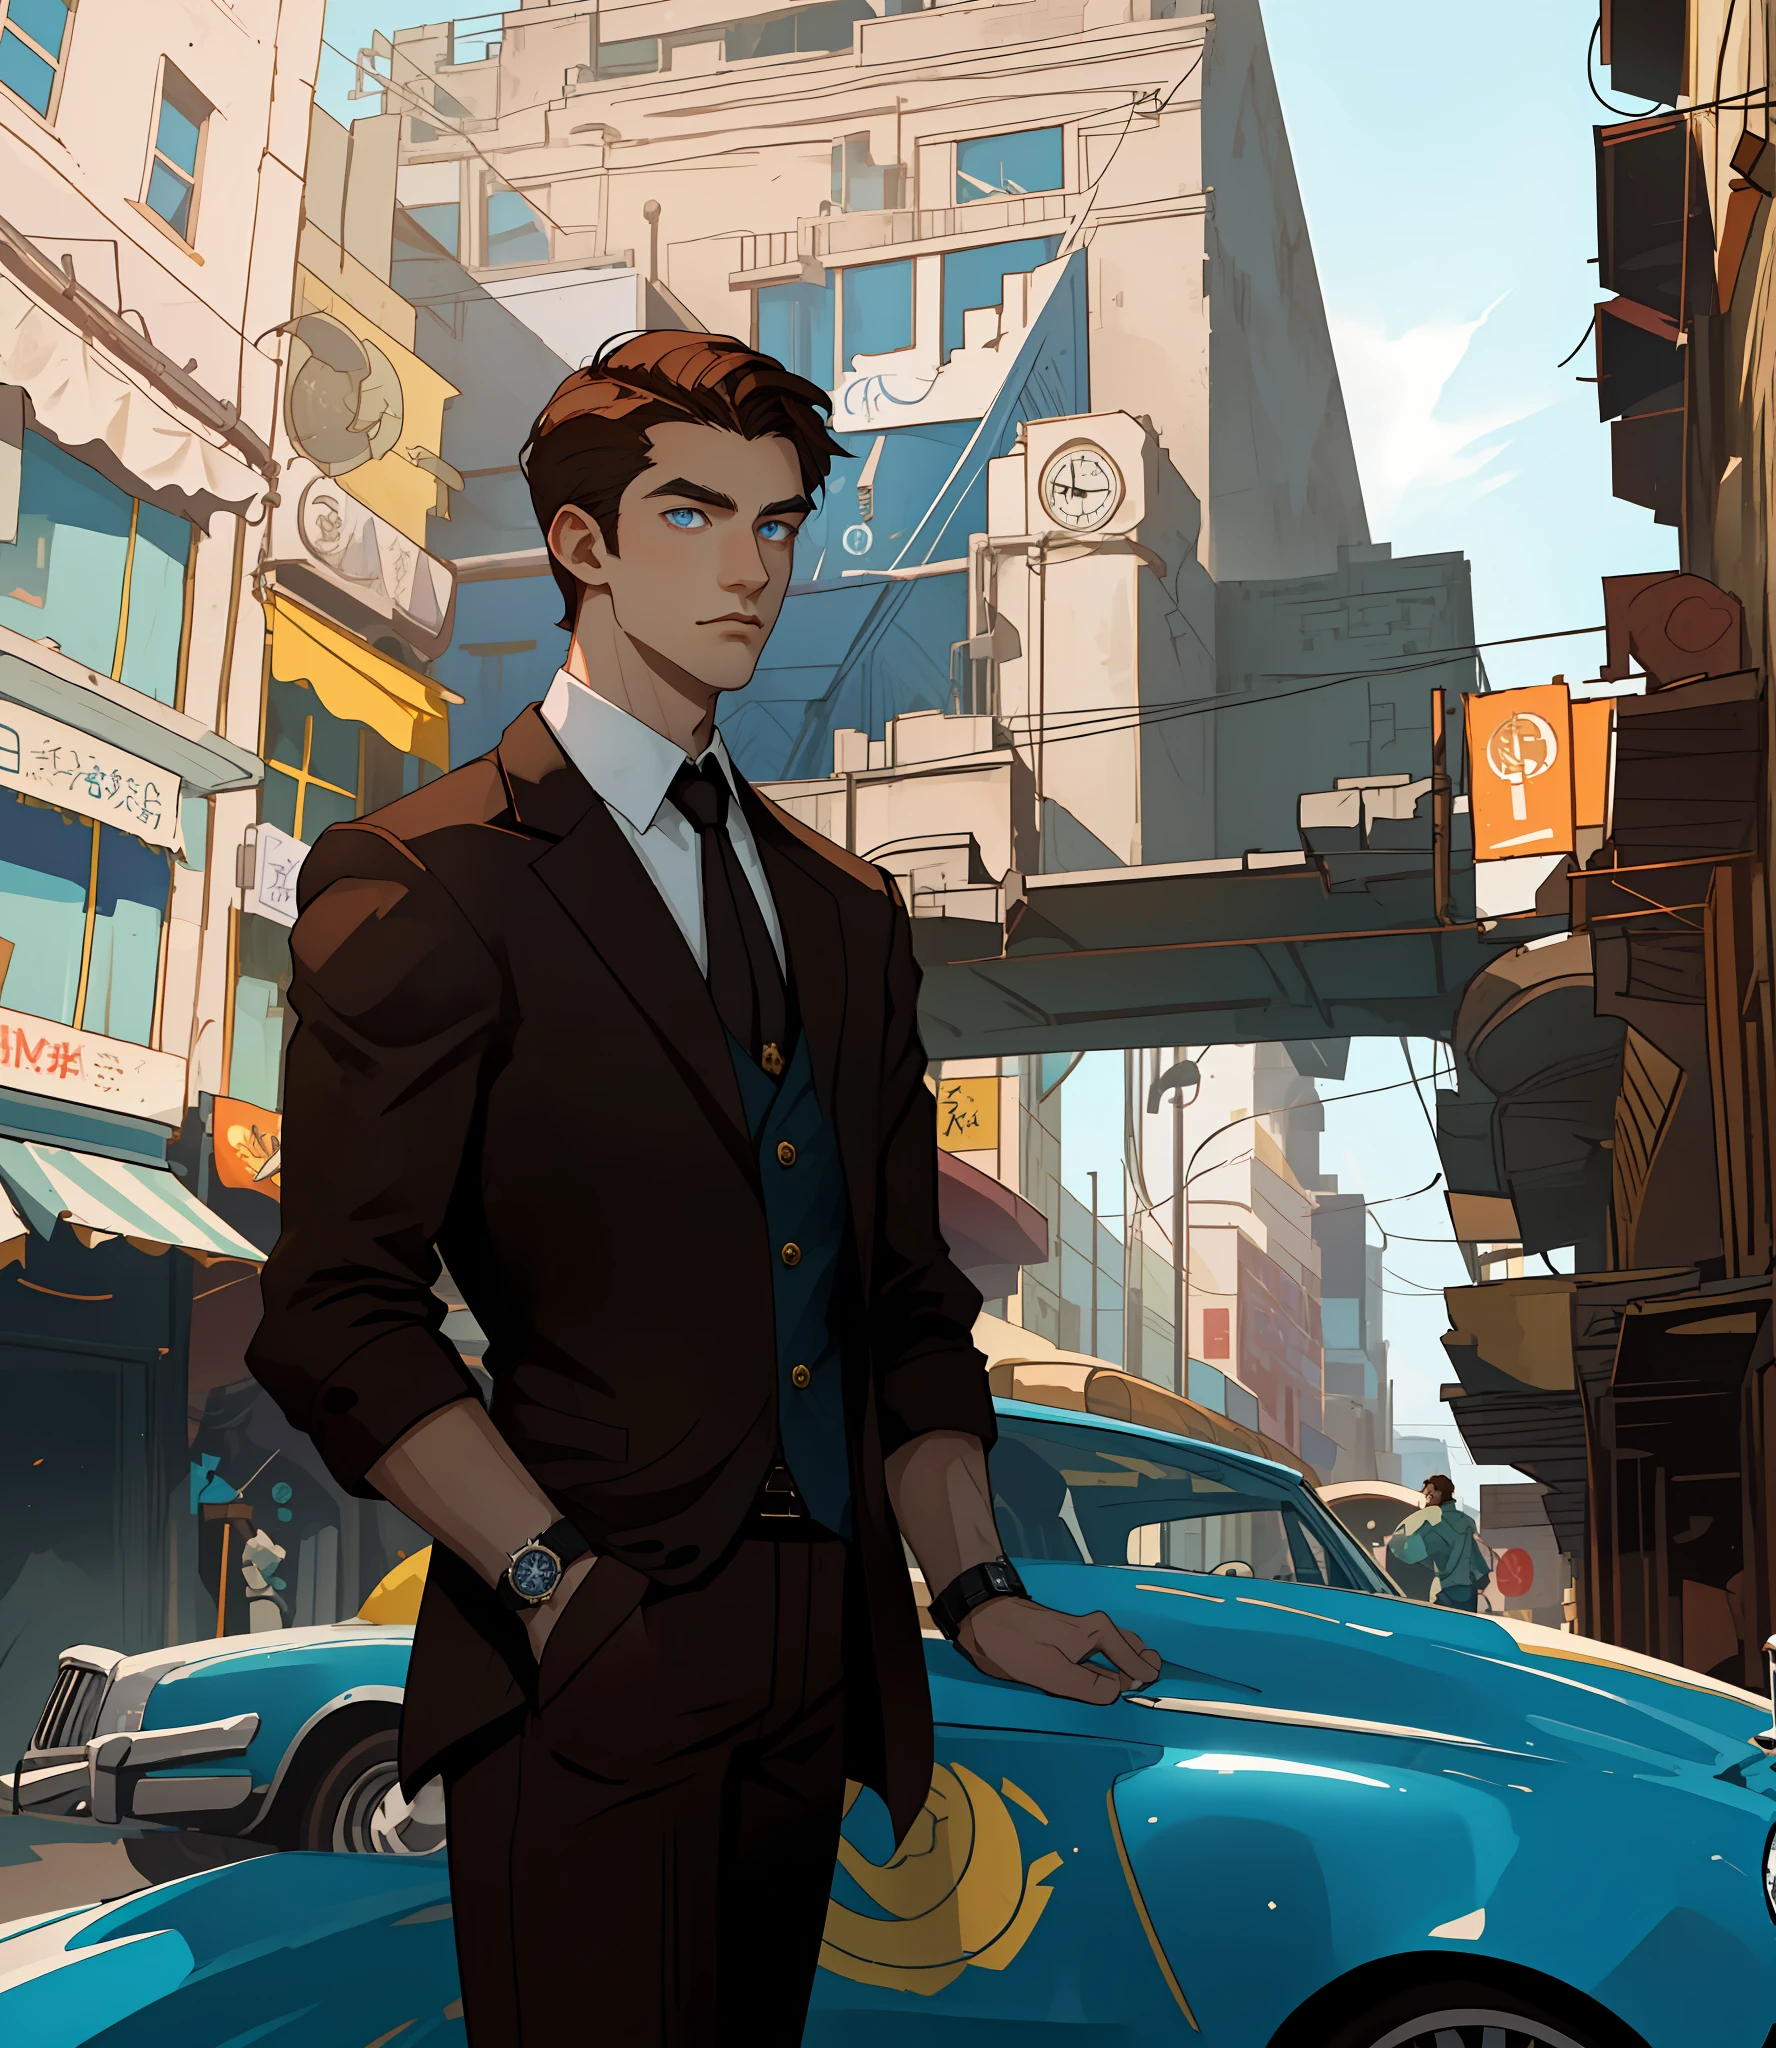 A young man, 20 years old, a Man, male Character, 1boy, slender, brown hair, blue eyes, looking at his watch, waiting, on a sunny day, city, metal steel building, pole, car in the distance, hdr: 1.25, intricate details: 1.14, filmic: 0.55